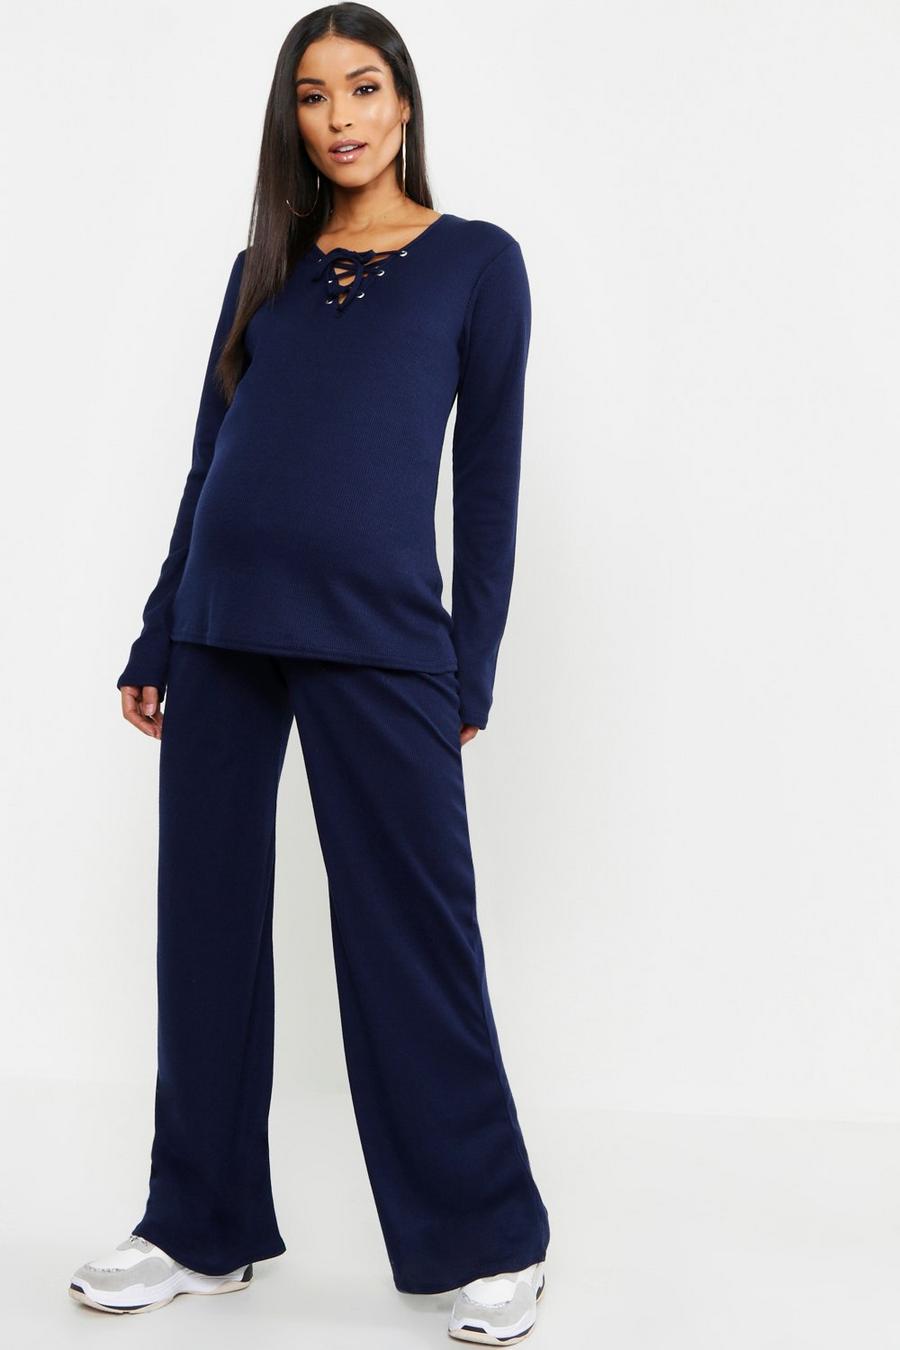 Navy Maternity Lace Up Front Loungewear Set image number 1